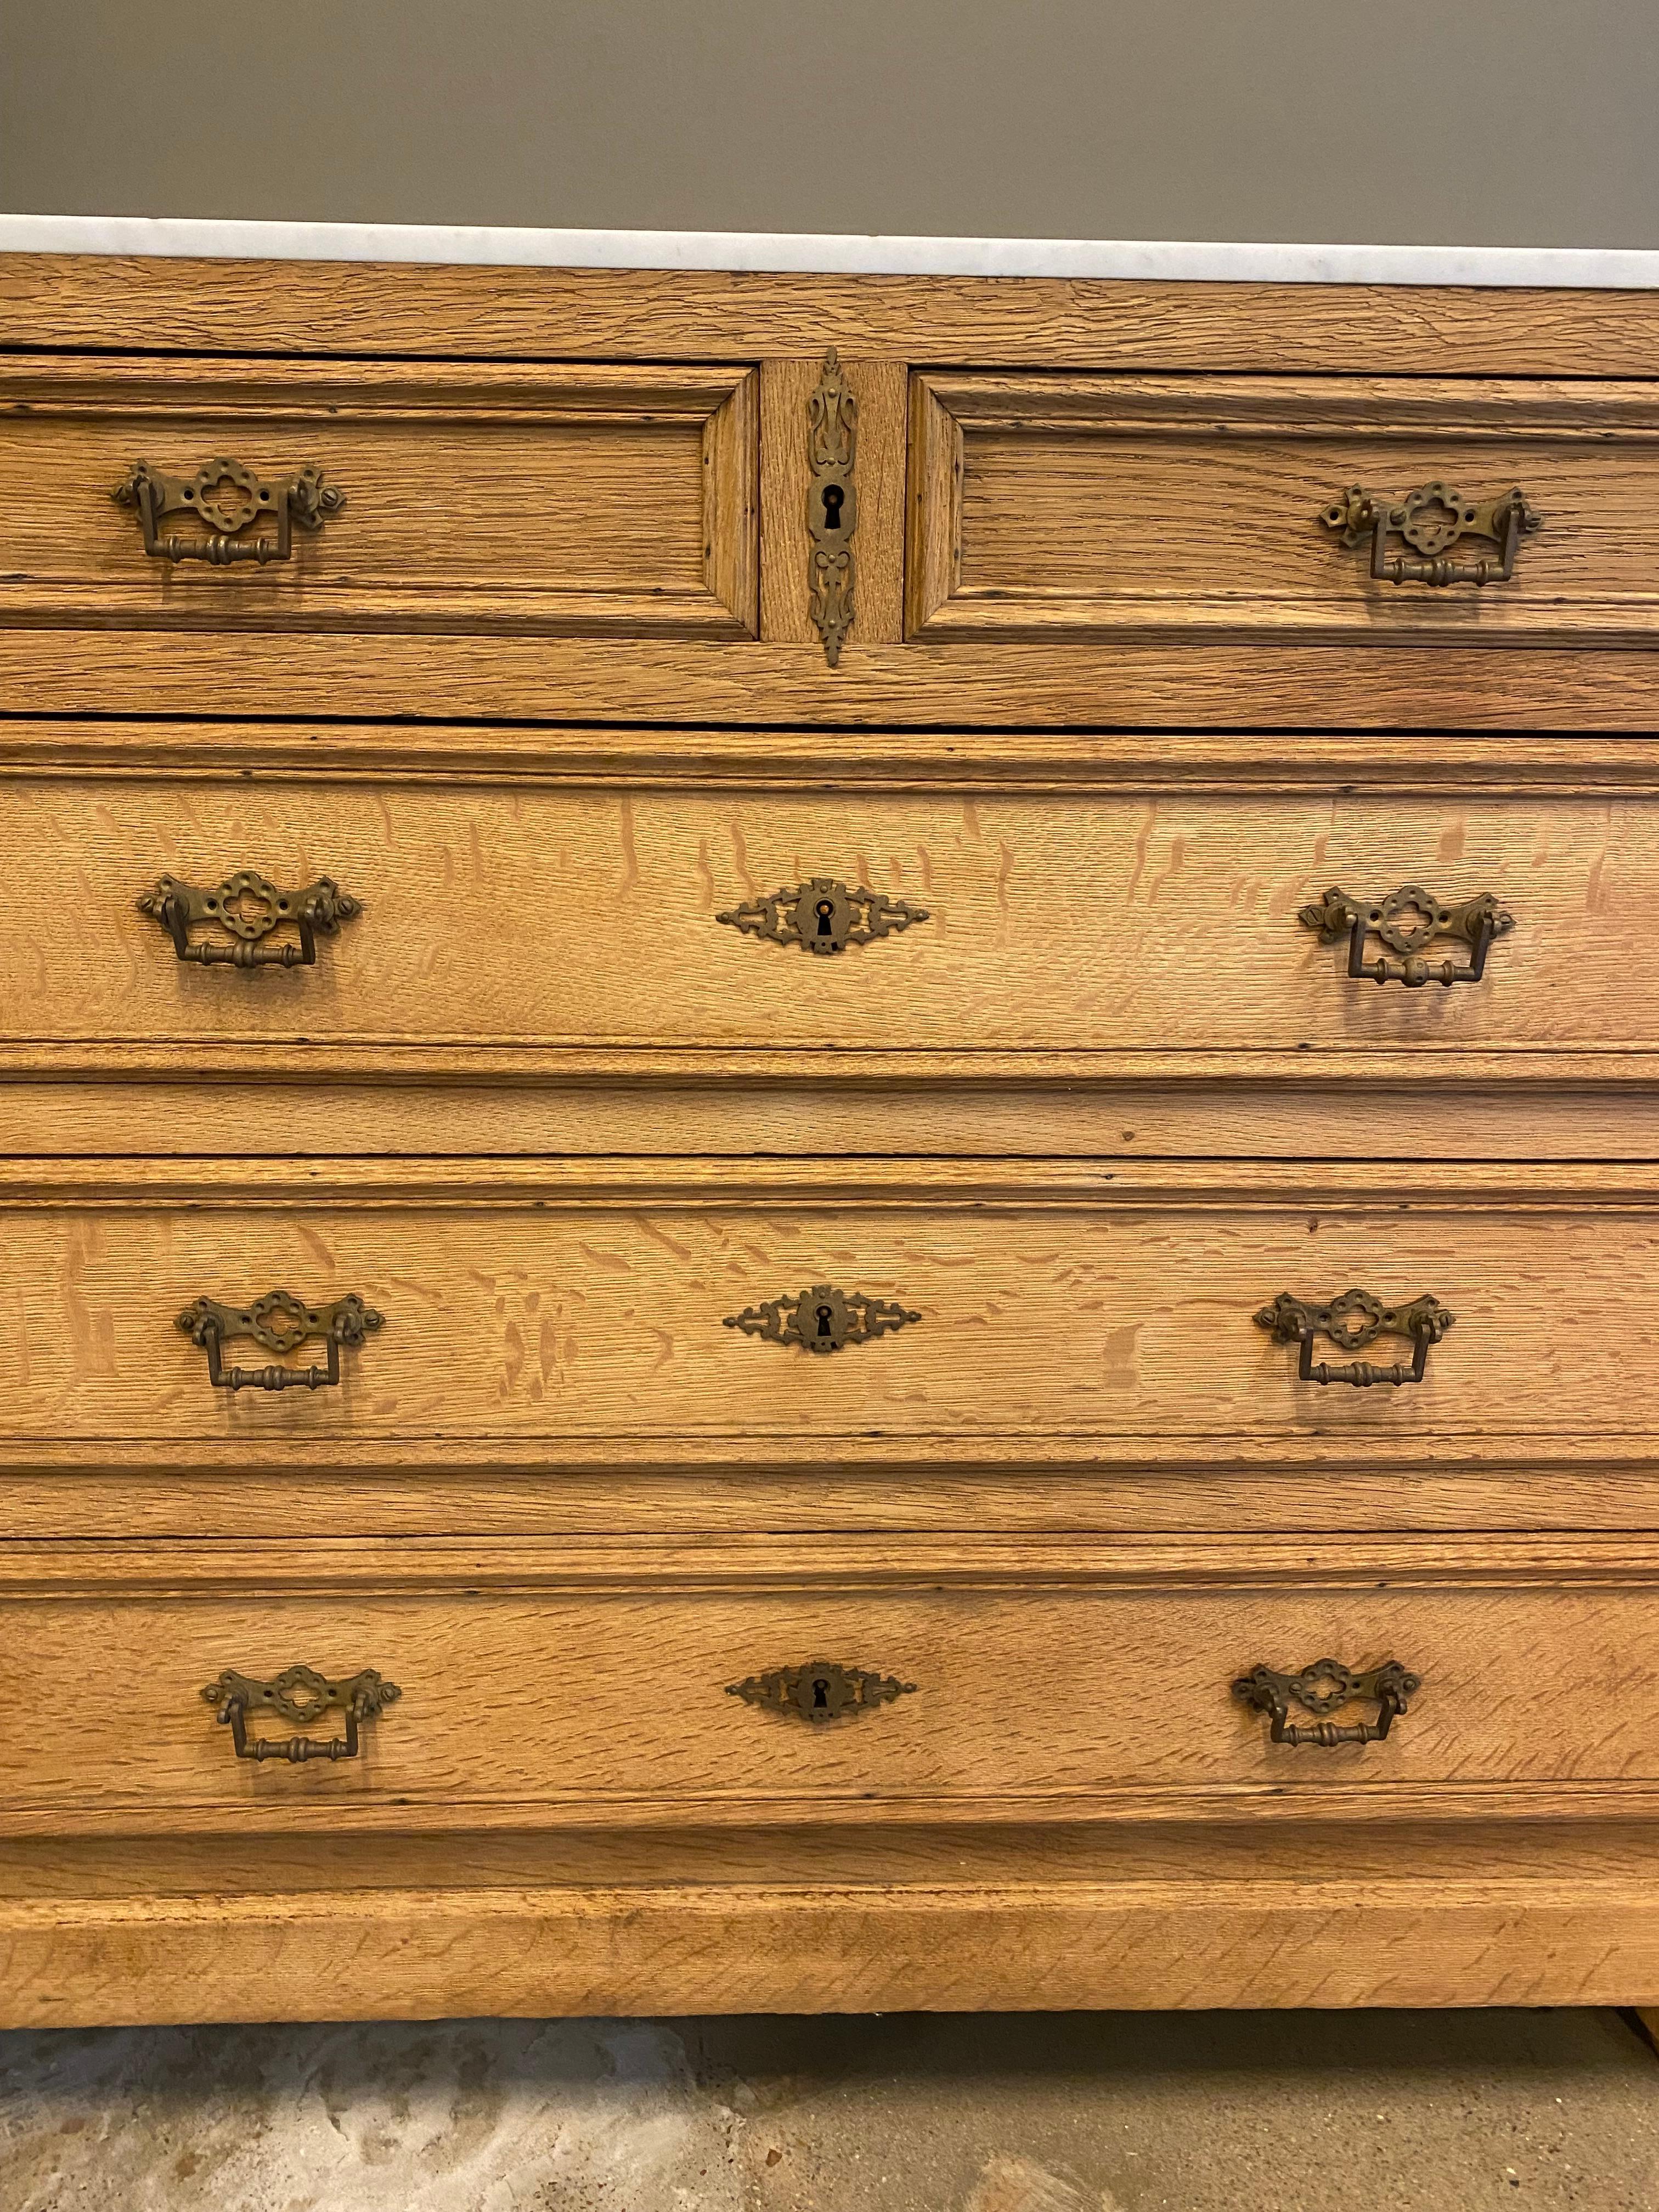 19th century country French provincial commode or chest of drawers crafted from oak with a bleached finish. The chest features a white Carrara marble-top with evidence of a prior wash stand backing. Fitted with five storage drawers the case has